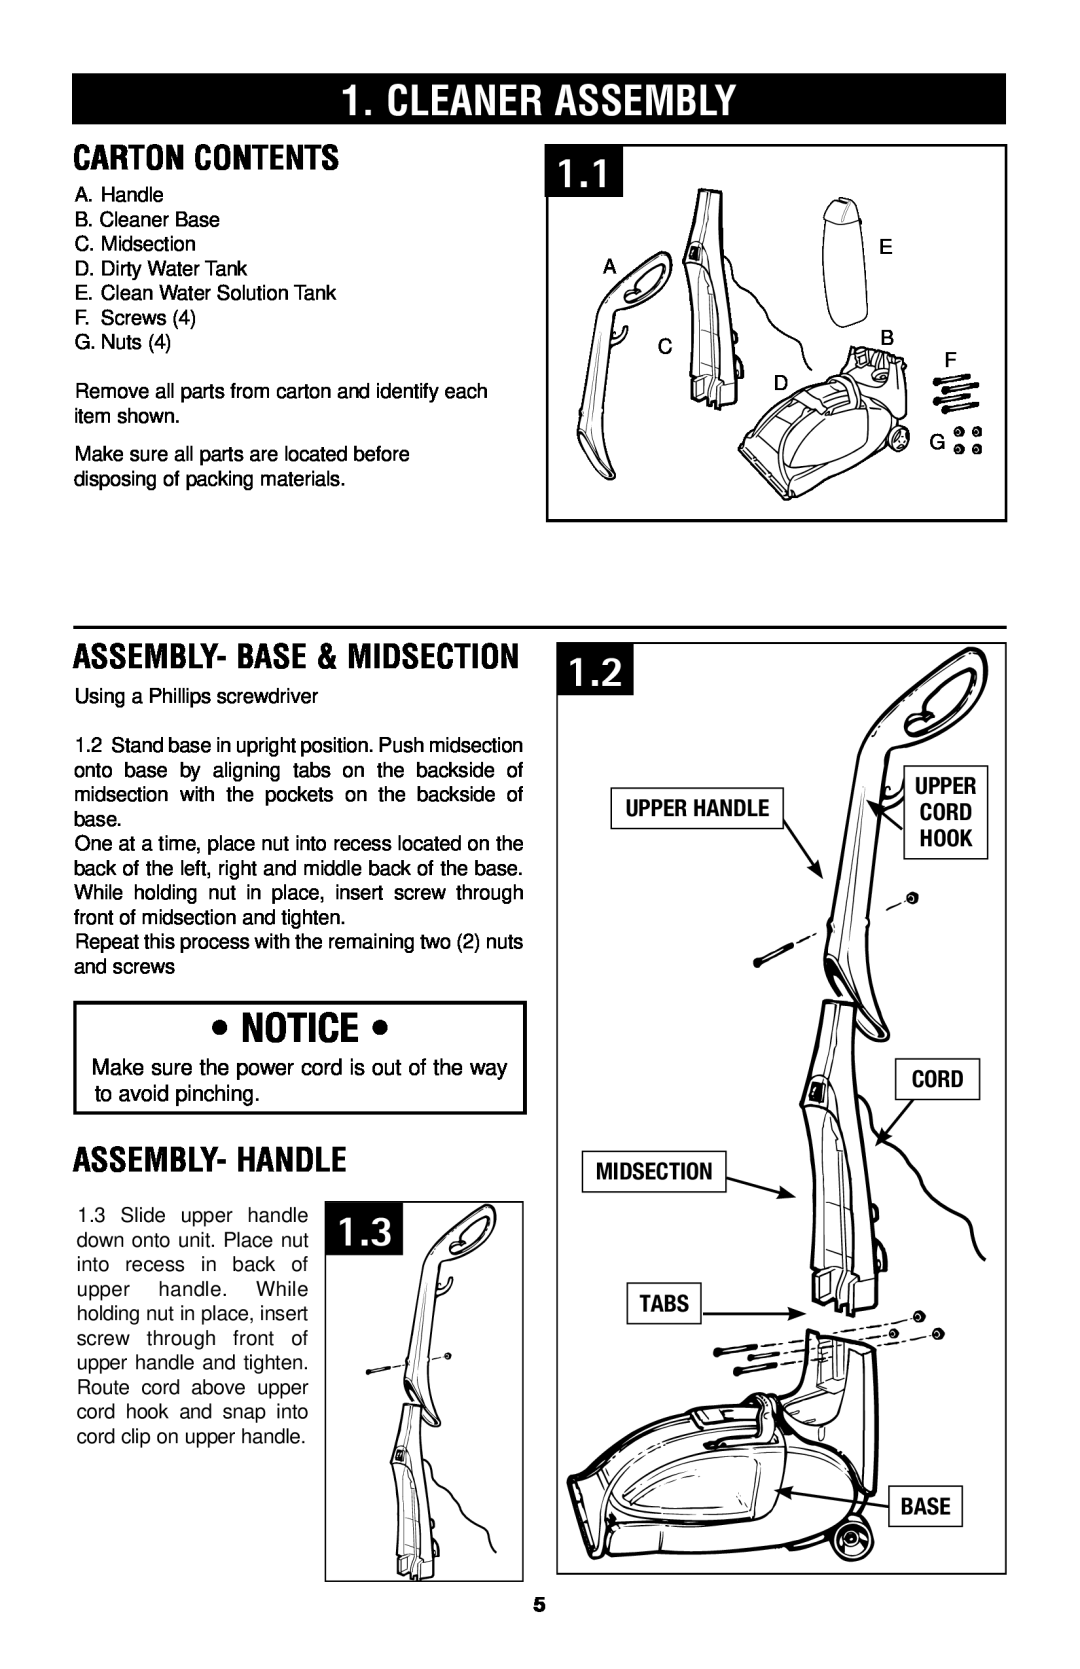 Hoover E1 owner manual Carton contents, ASSEMBLY- Handle, ASSEMBLY- Base & Midsection, CleanerVacuum ASSEMBLY, Upper Handle 